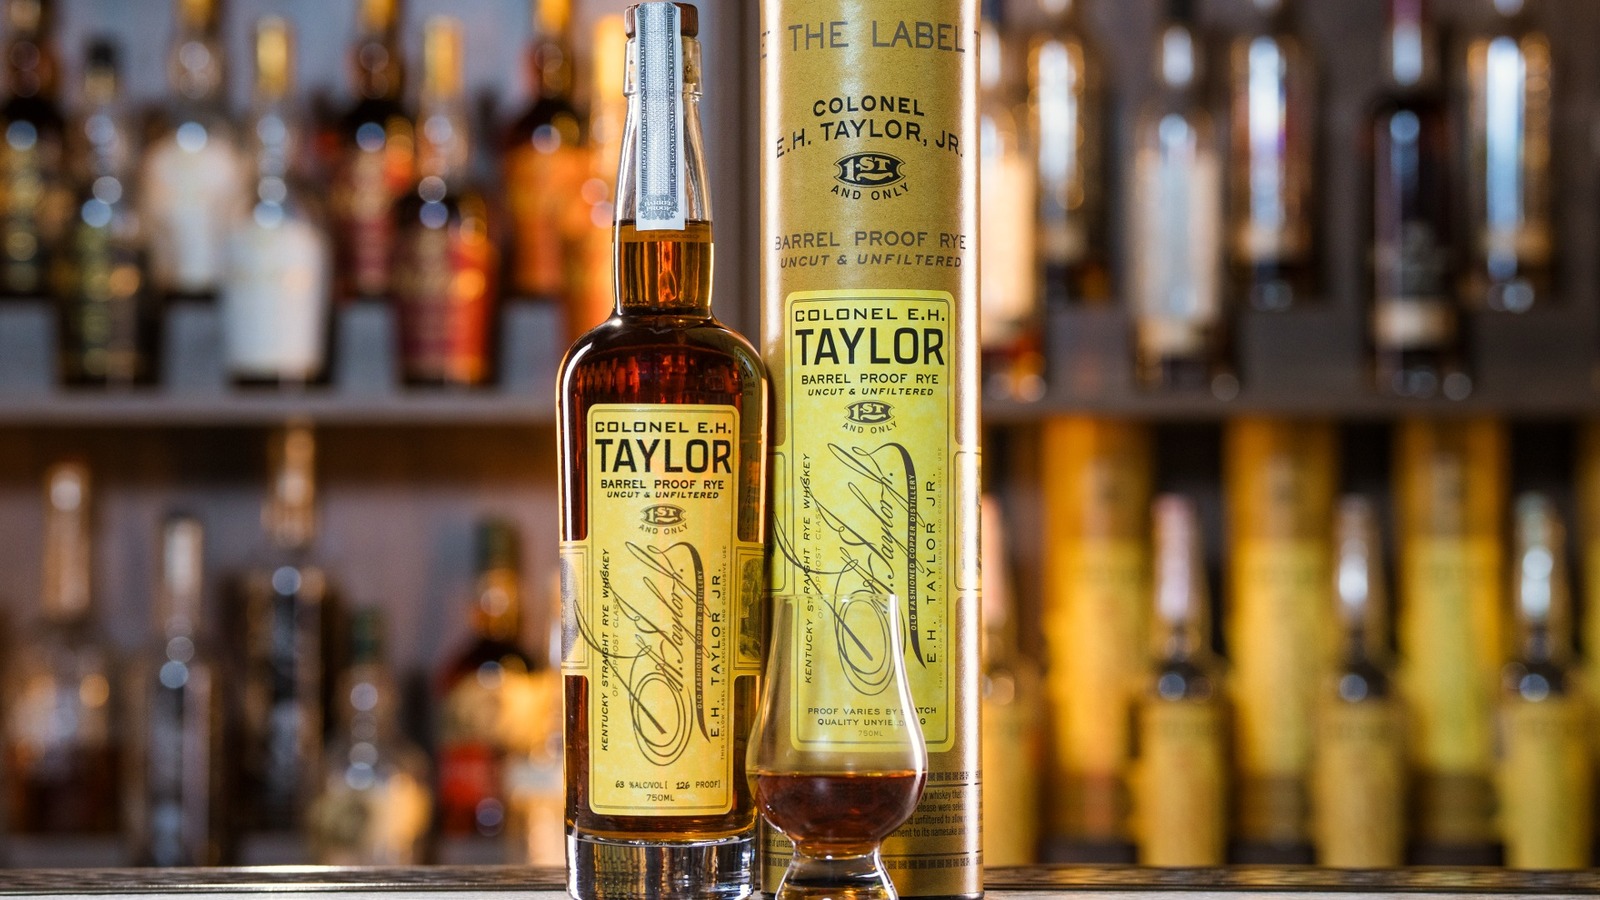 Colonel EH Taylor, Jr. Barrel Proof Rye Whiskey